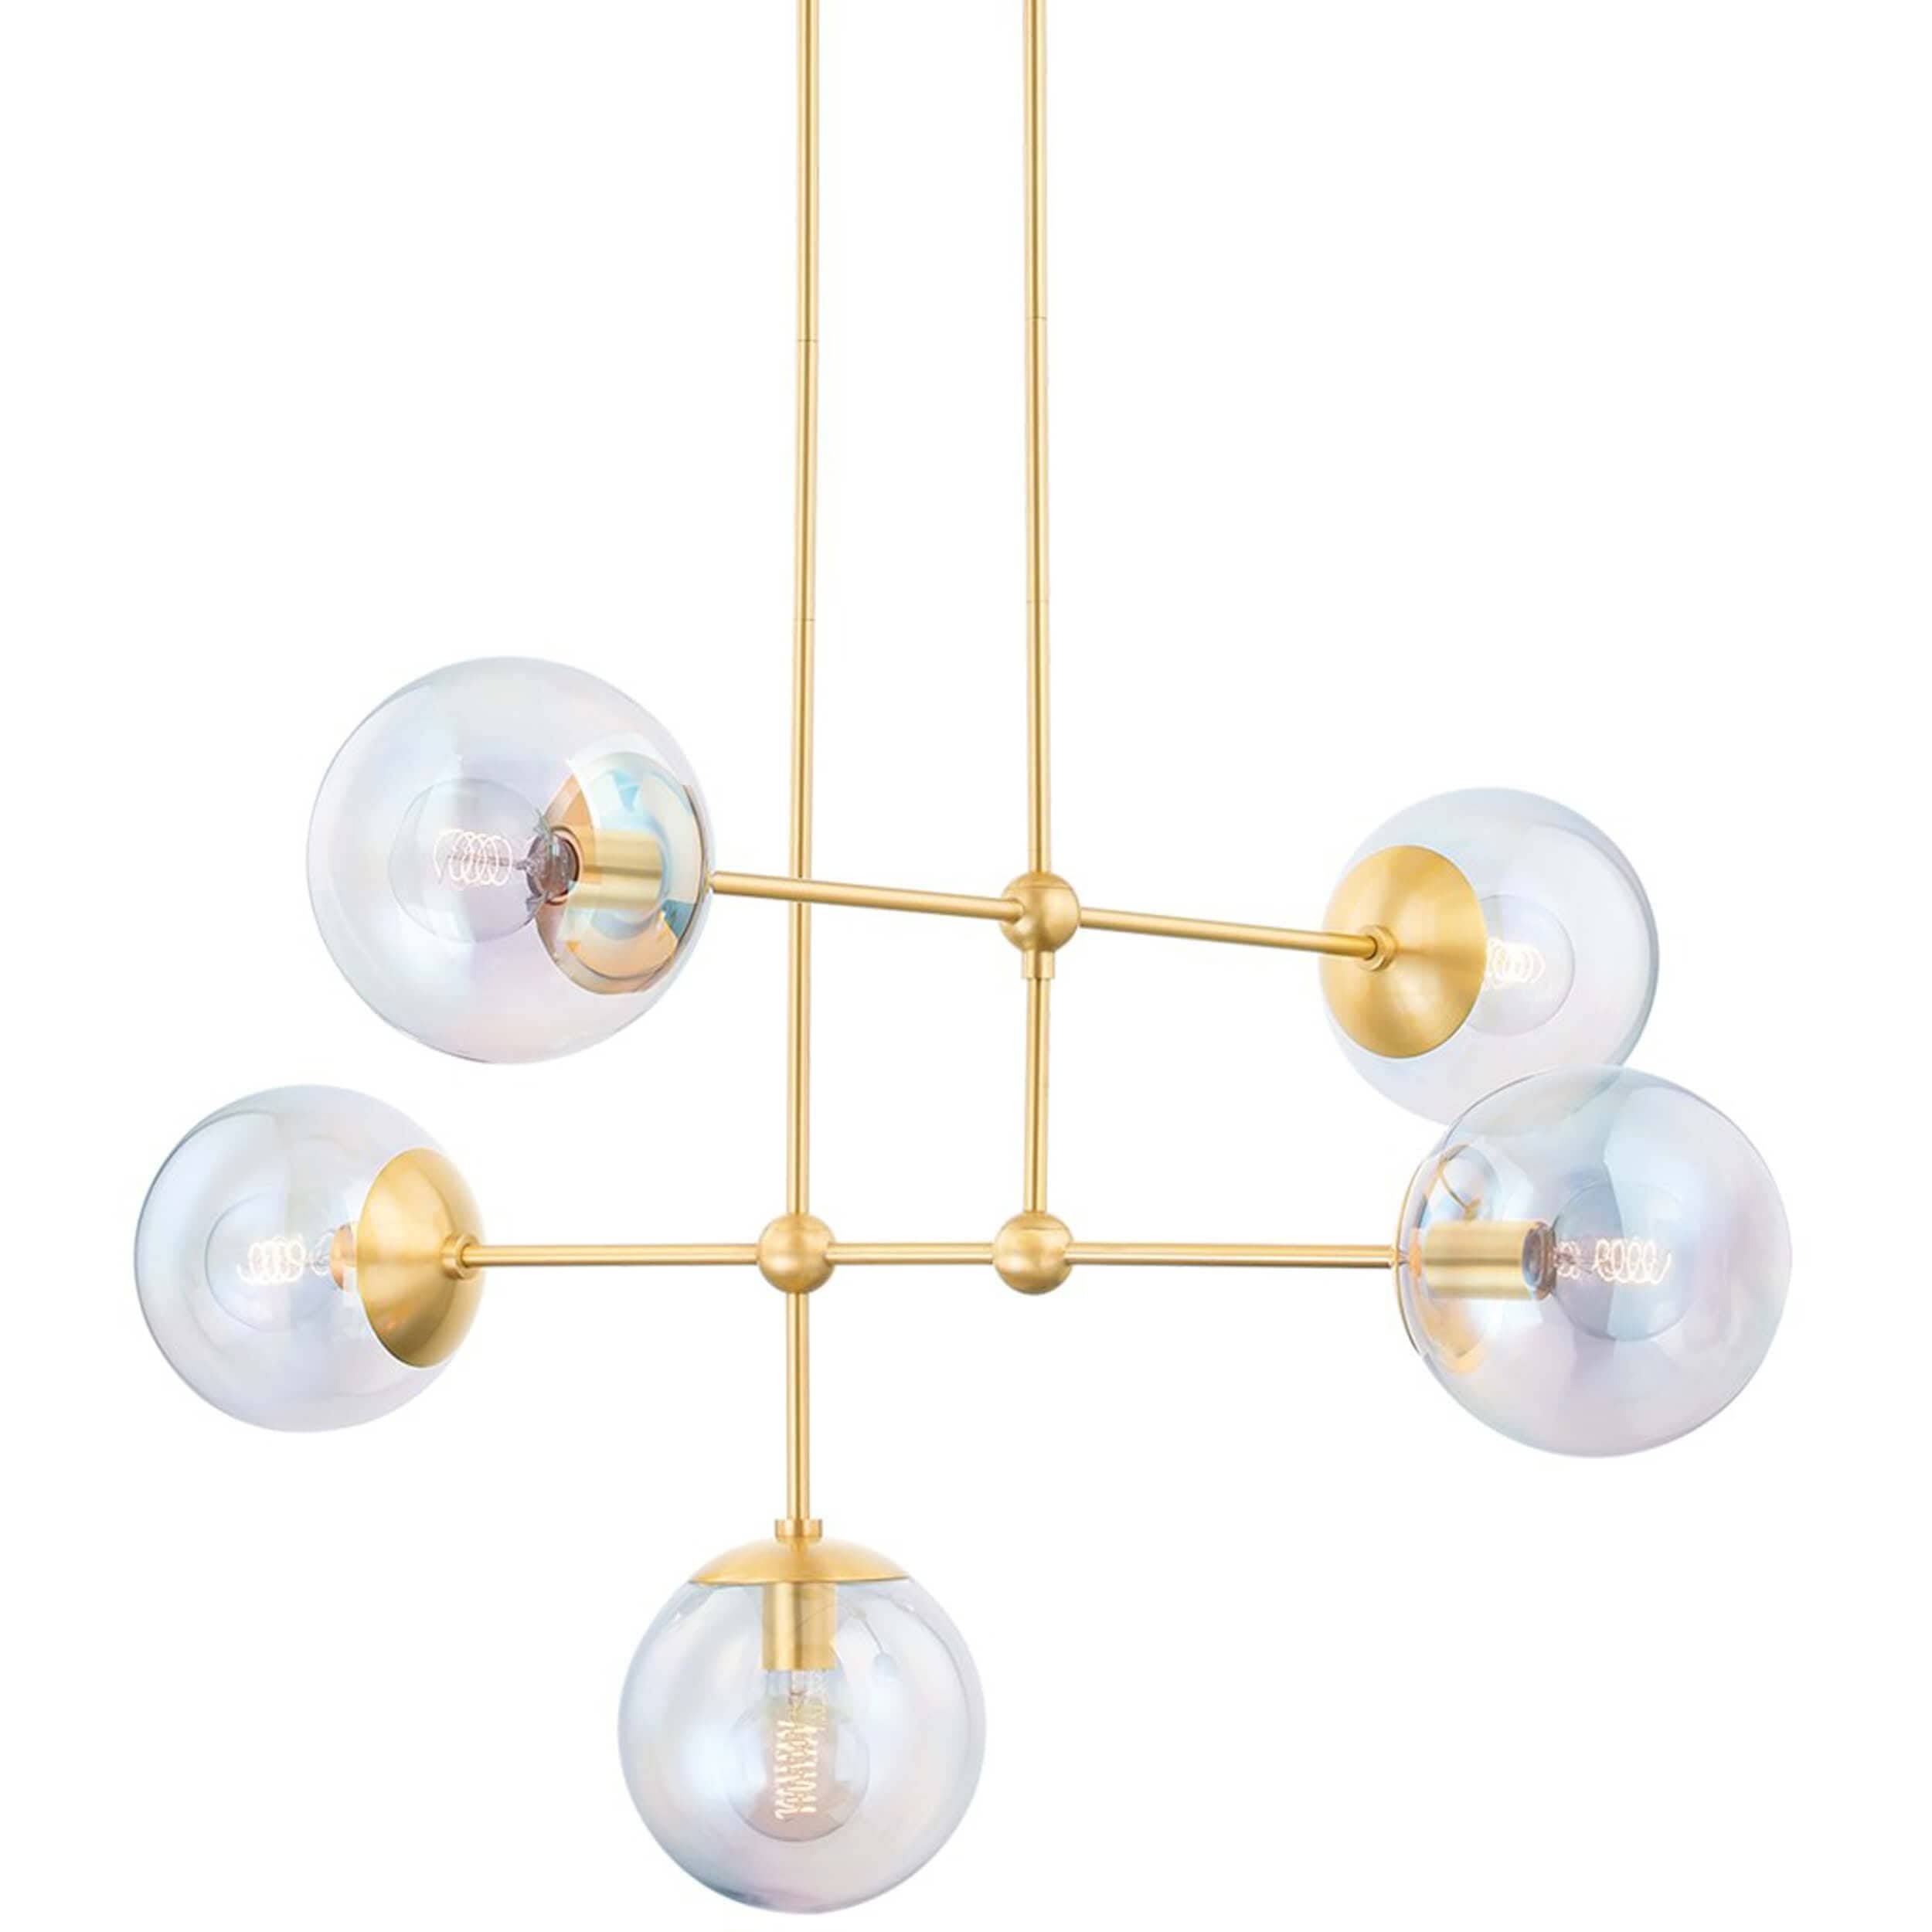 Image of Ophelia 5 Light Chandelier, Aged Brass